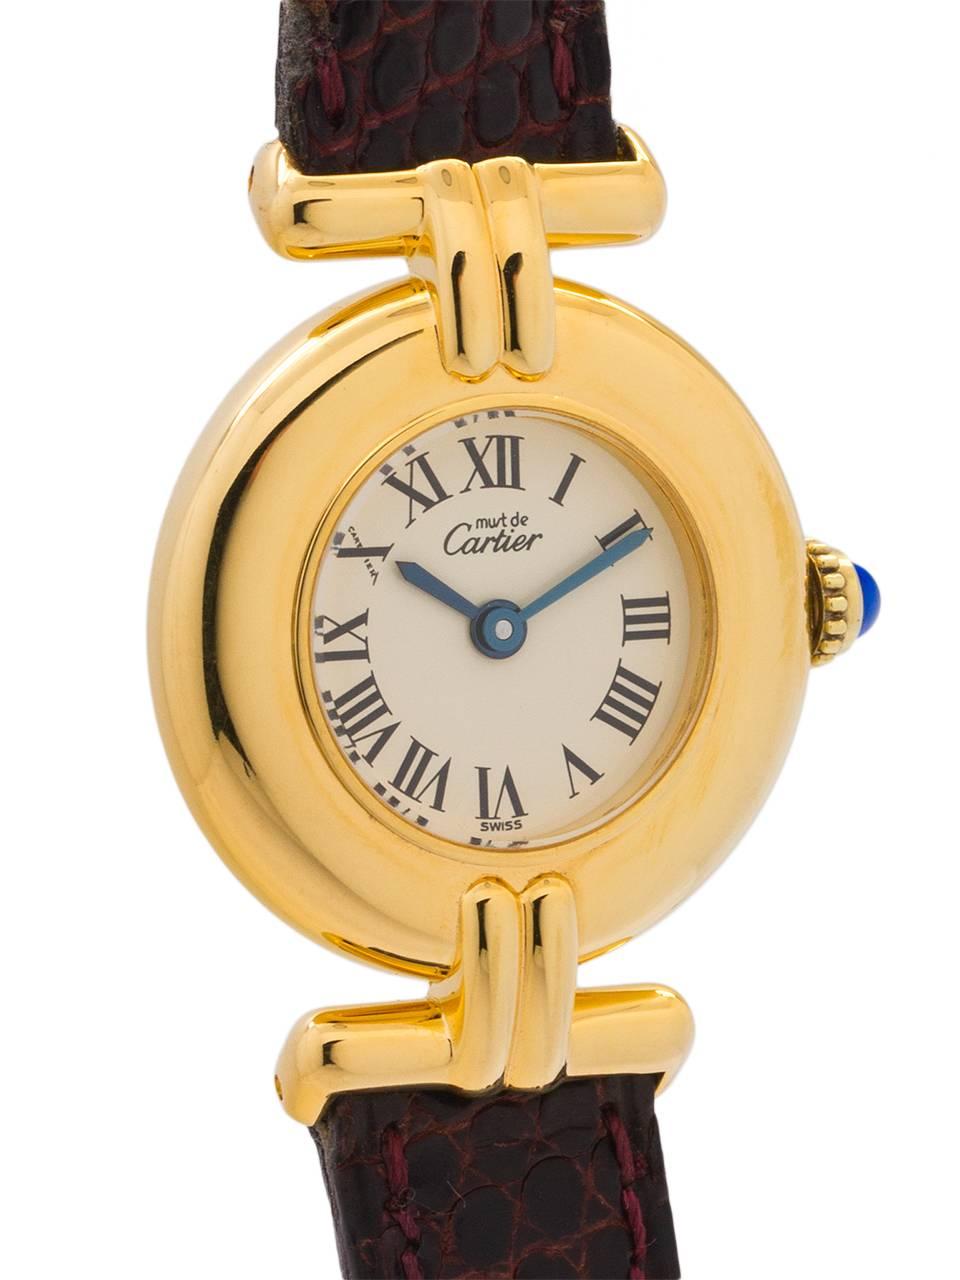 
Cartier Lady’s Must de Colisee circa 1990s. Featuring 23 x 31mm round vermeil (20 microns gold over silver) case with wide dome bezel, sapphire crystal, silvered dial with black Roman figures. Battery powered quartz movement with cabochon sapphire